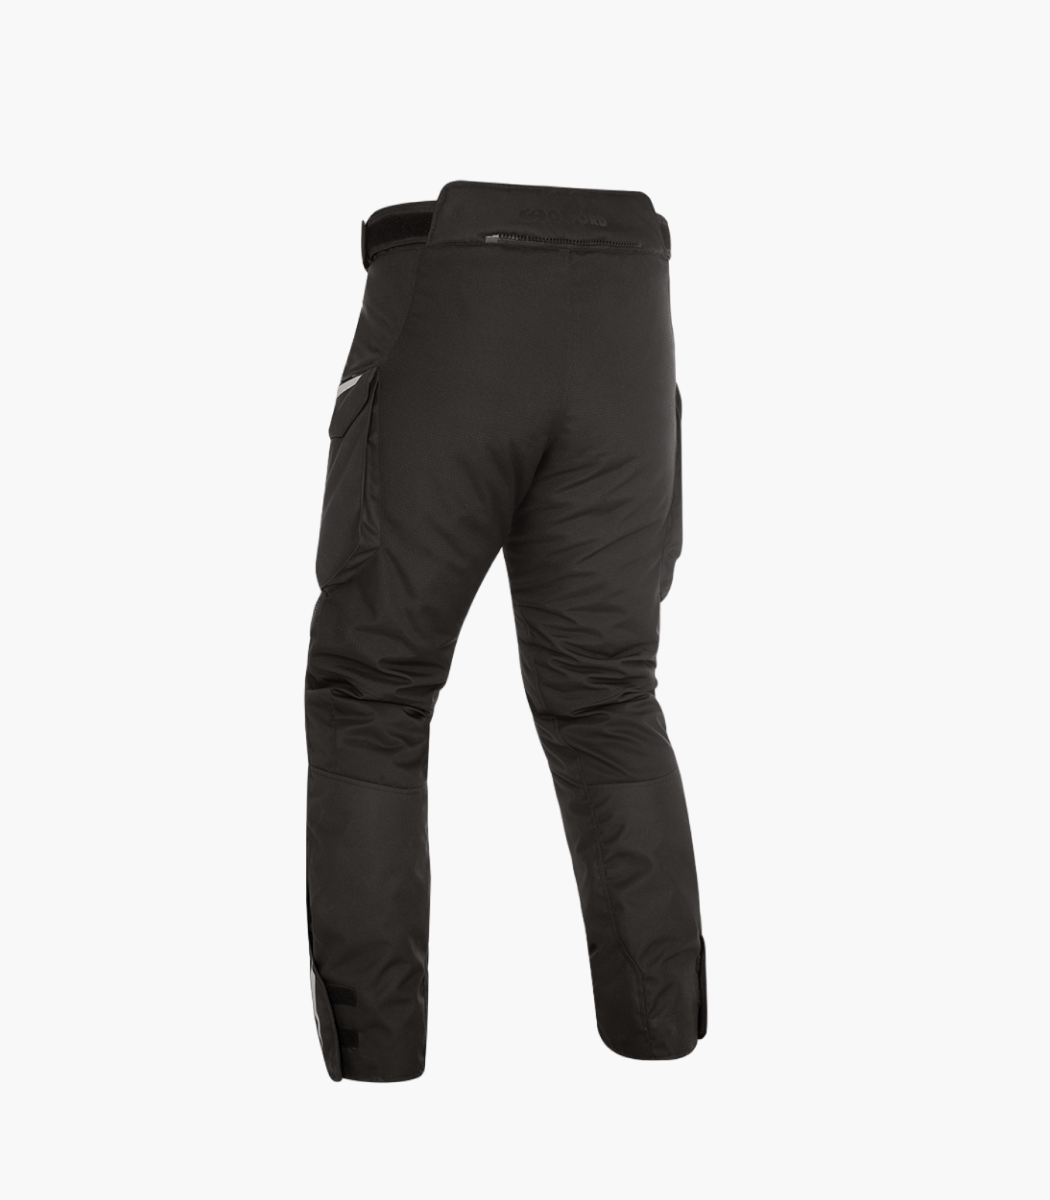 OXFORD CONVOY 4.0 MS DRY2DRY PANTS - STEALTH BLACK